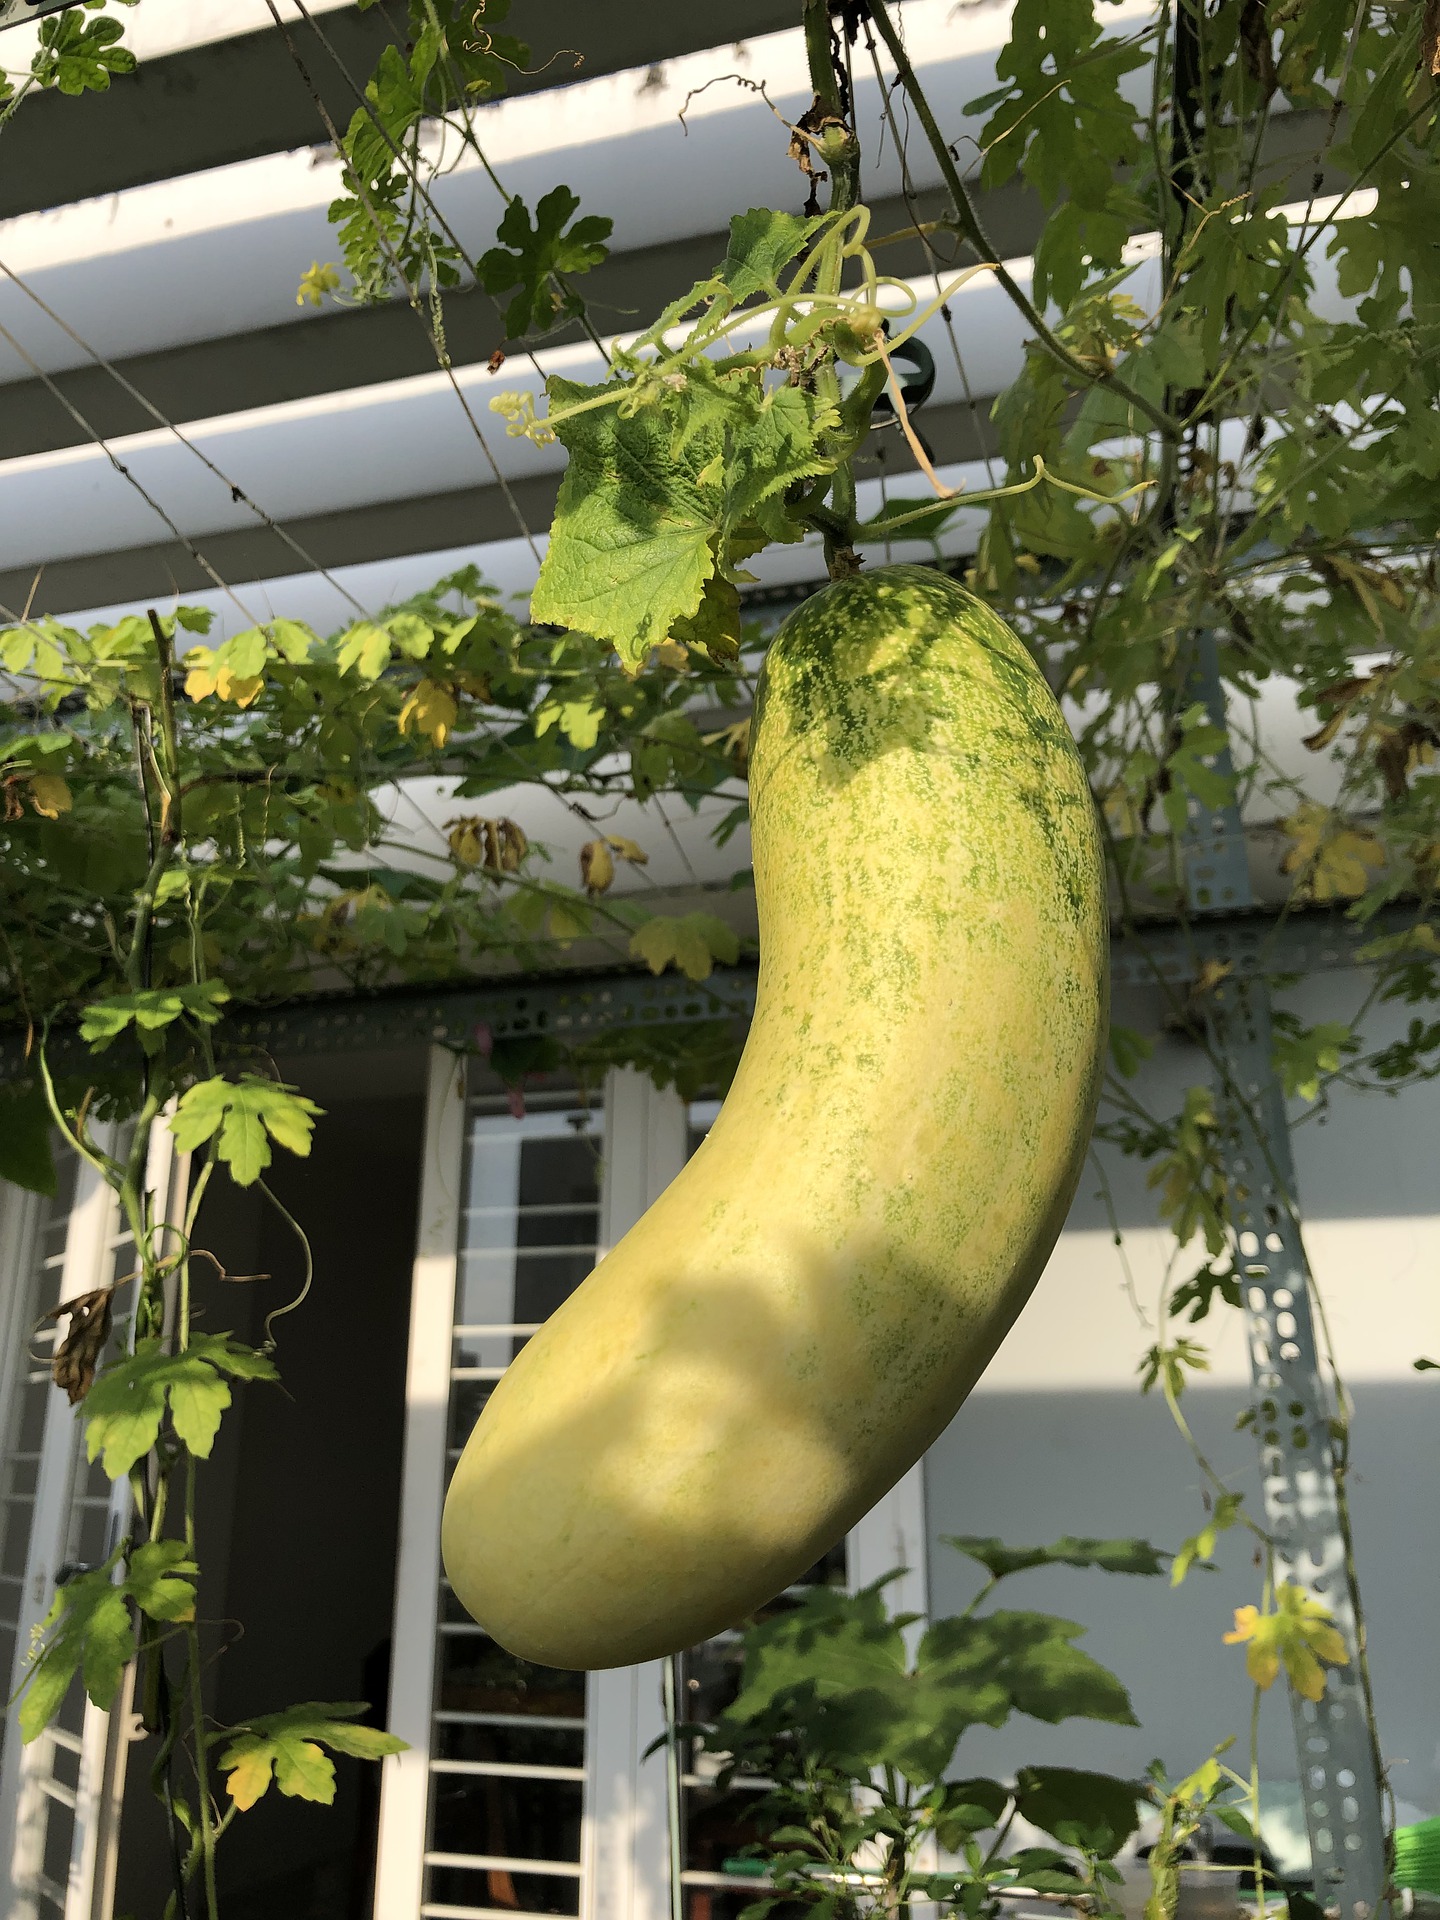 What Makes Cucumber Turn Yellow? And Are They Still Edible?